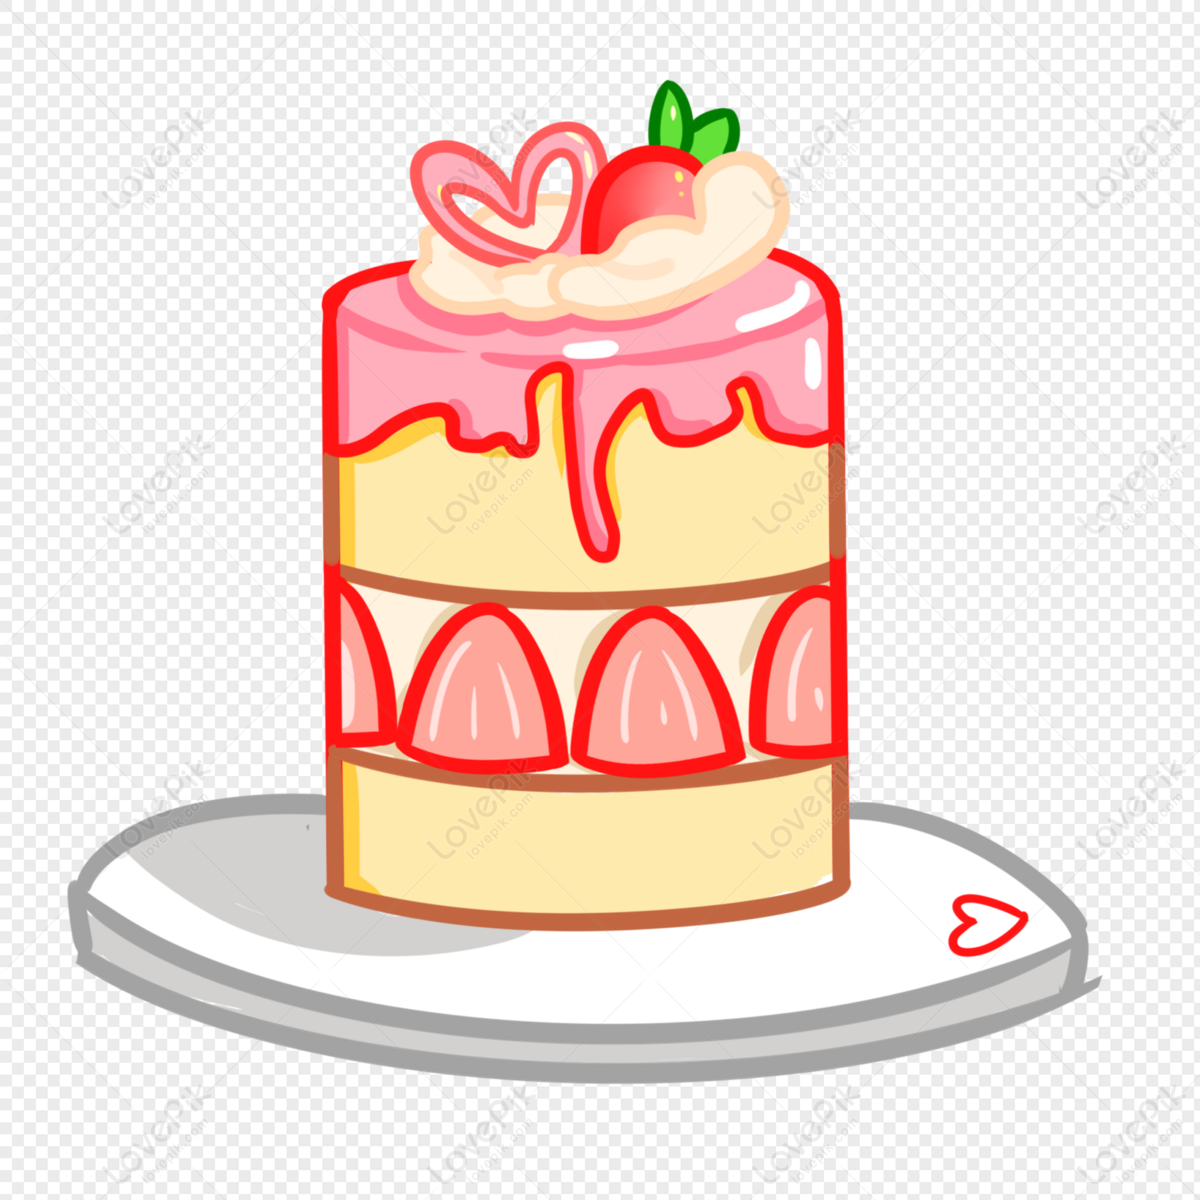 Birthday Cake PNG Transparent And Clipart Image For Free Download - Lovepik  | 401175116